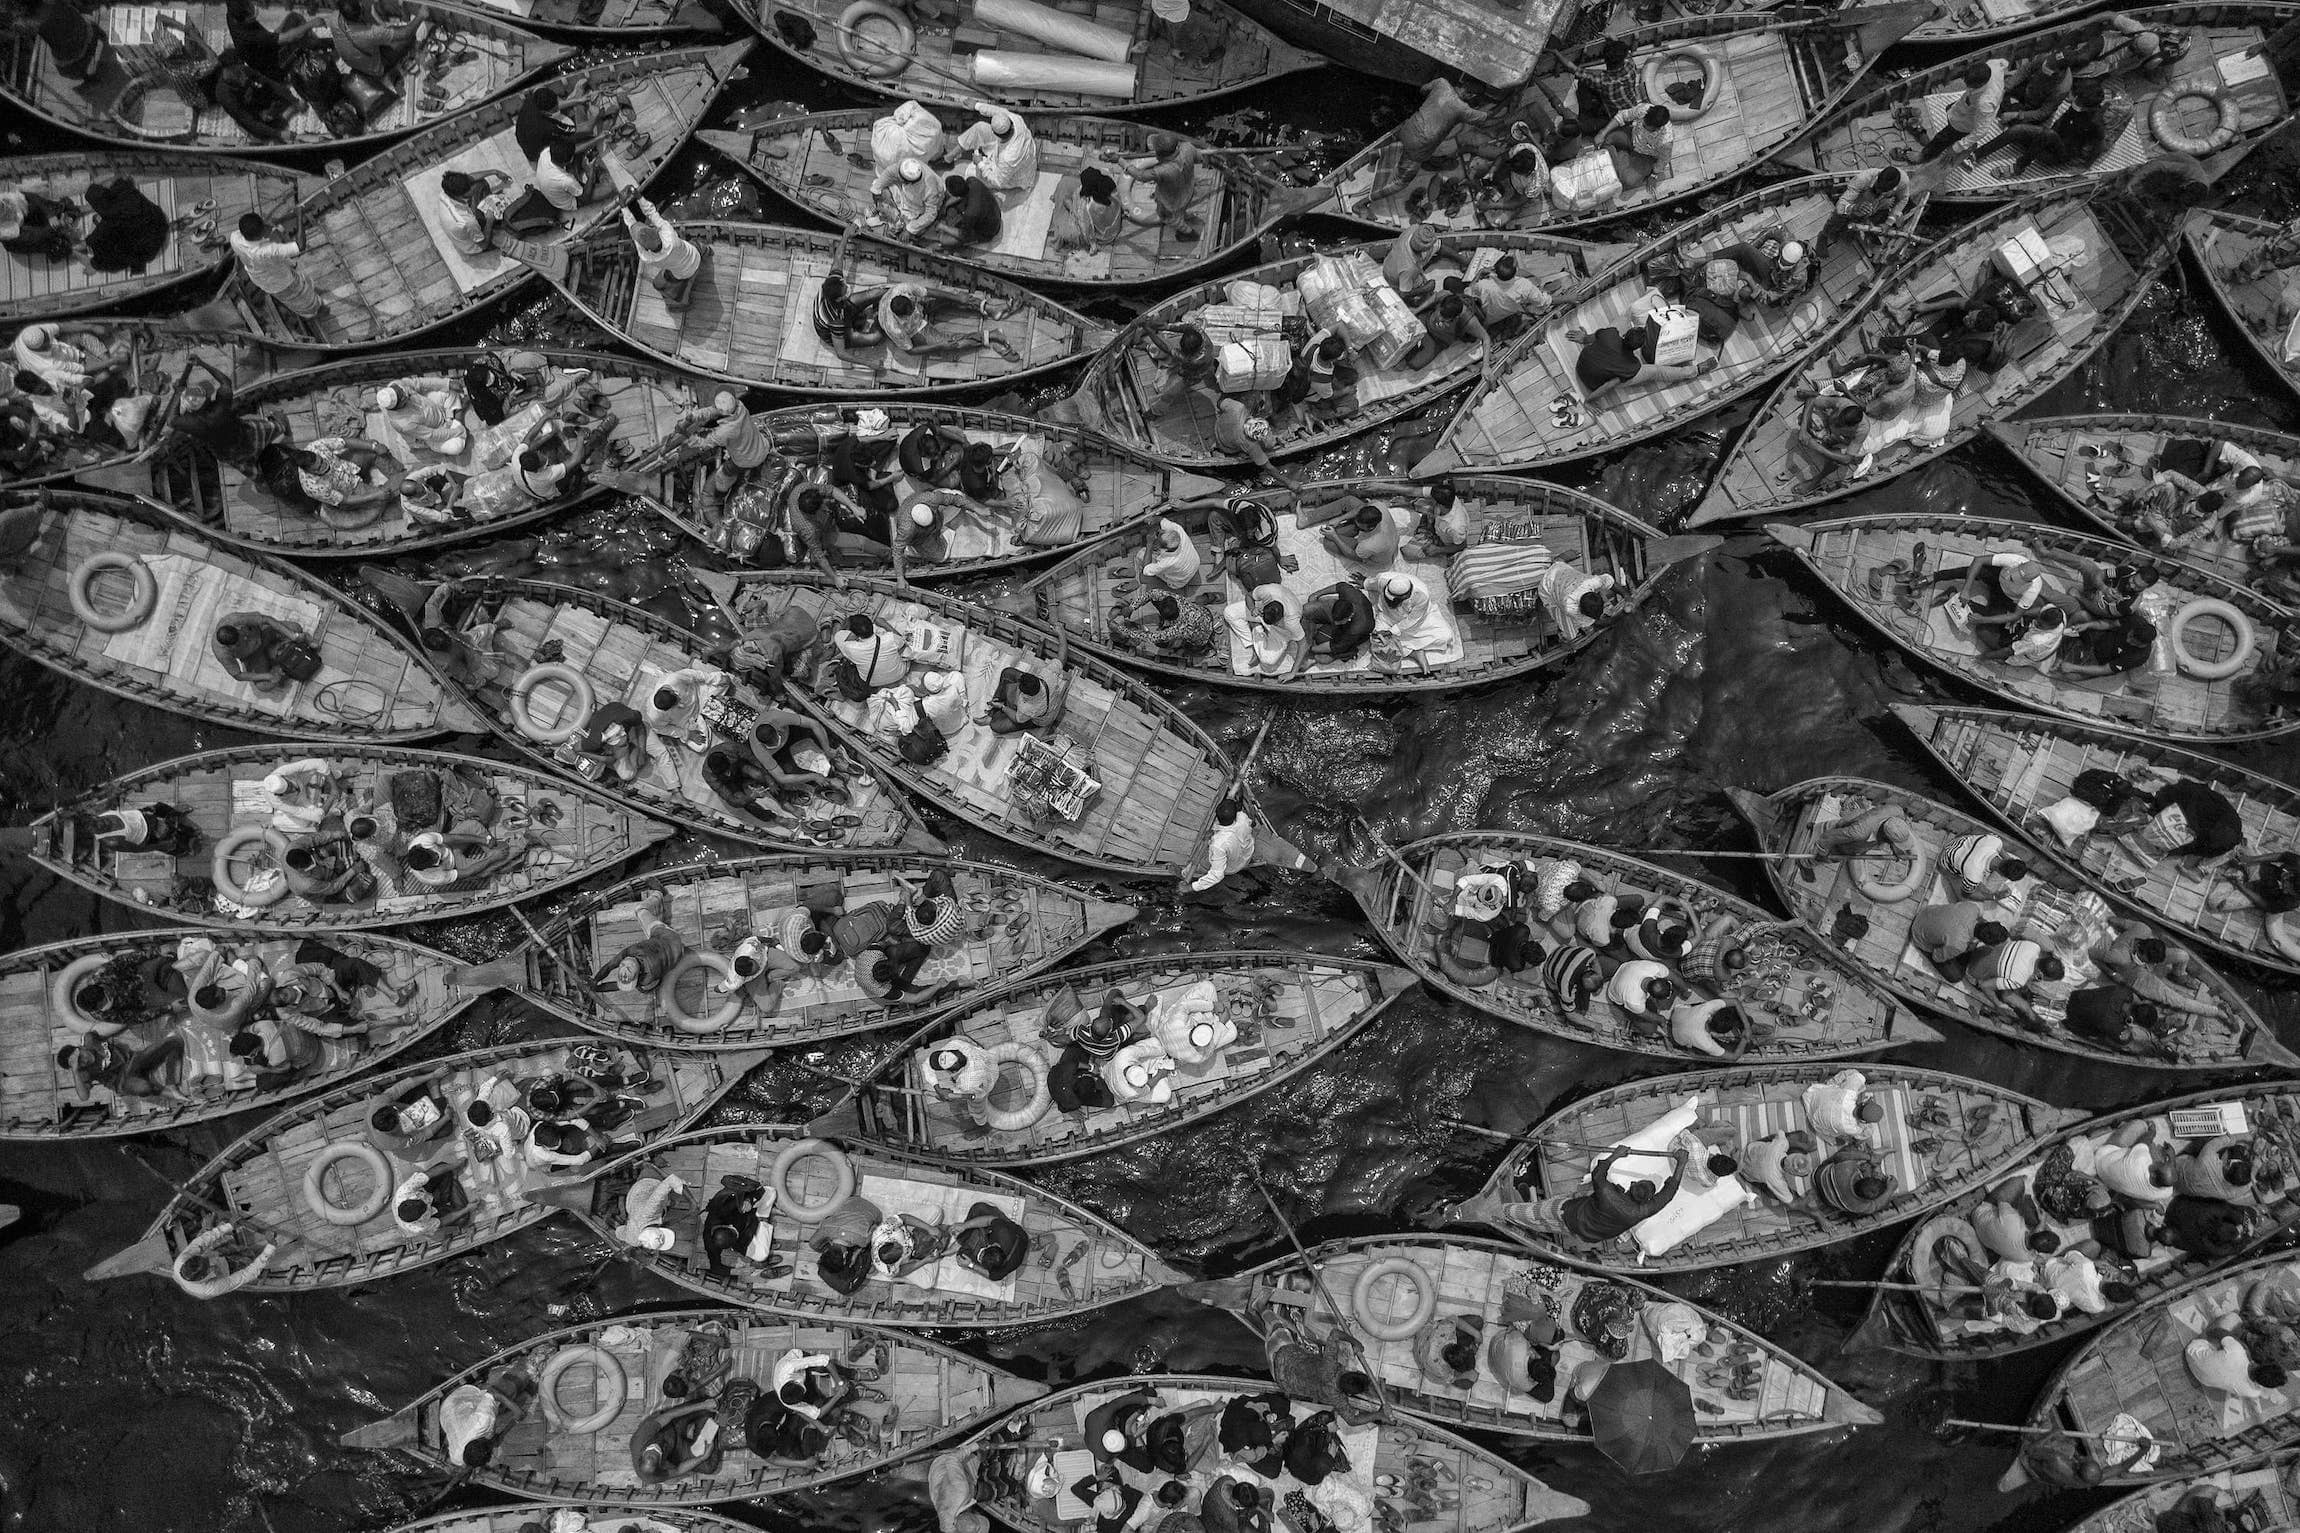 Street Second Winner - Azim Khan Ronnie - Boats filled with travelers